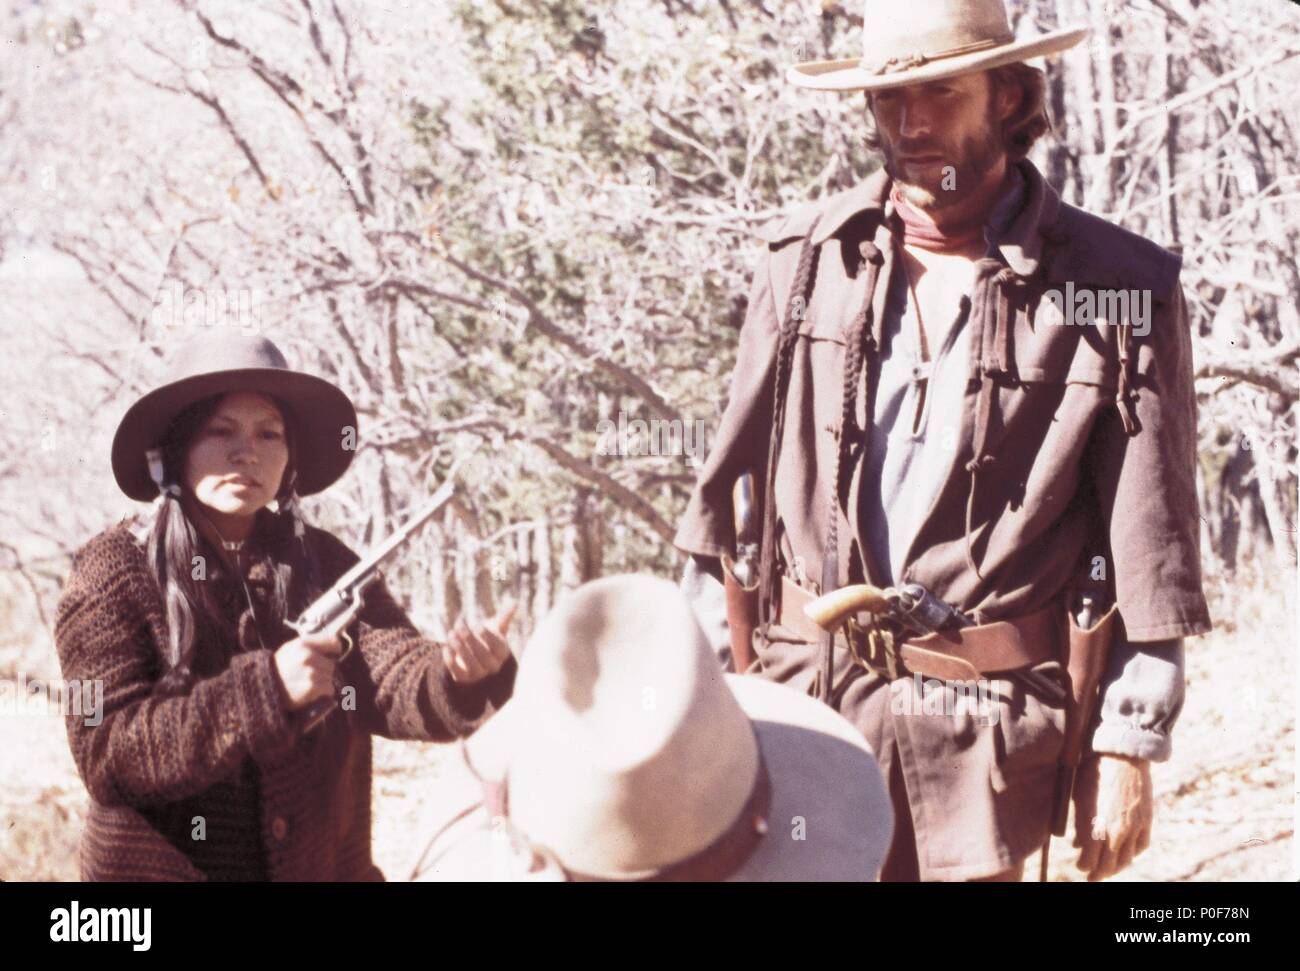 Original Film Title: THE OUTLAW JOSEY WALES.  English Title: THE OUTLAW JOSEY WALES.  Film Director: CLINT EASTWOOD.  Year: 1976.  Stars: CLINT EASTWOOD. Credit: WARNER BROTHERS / Album Stock Photo